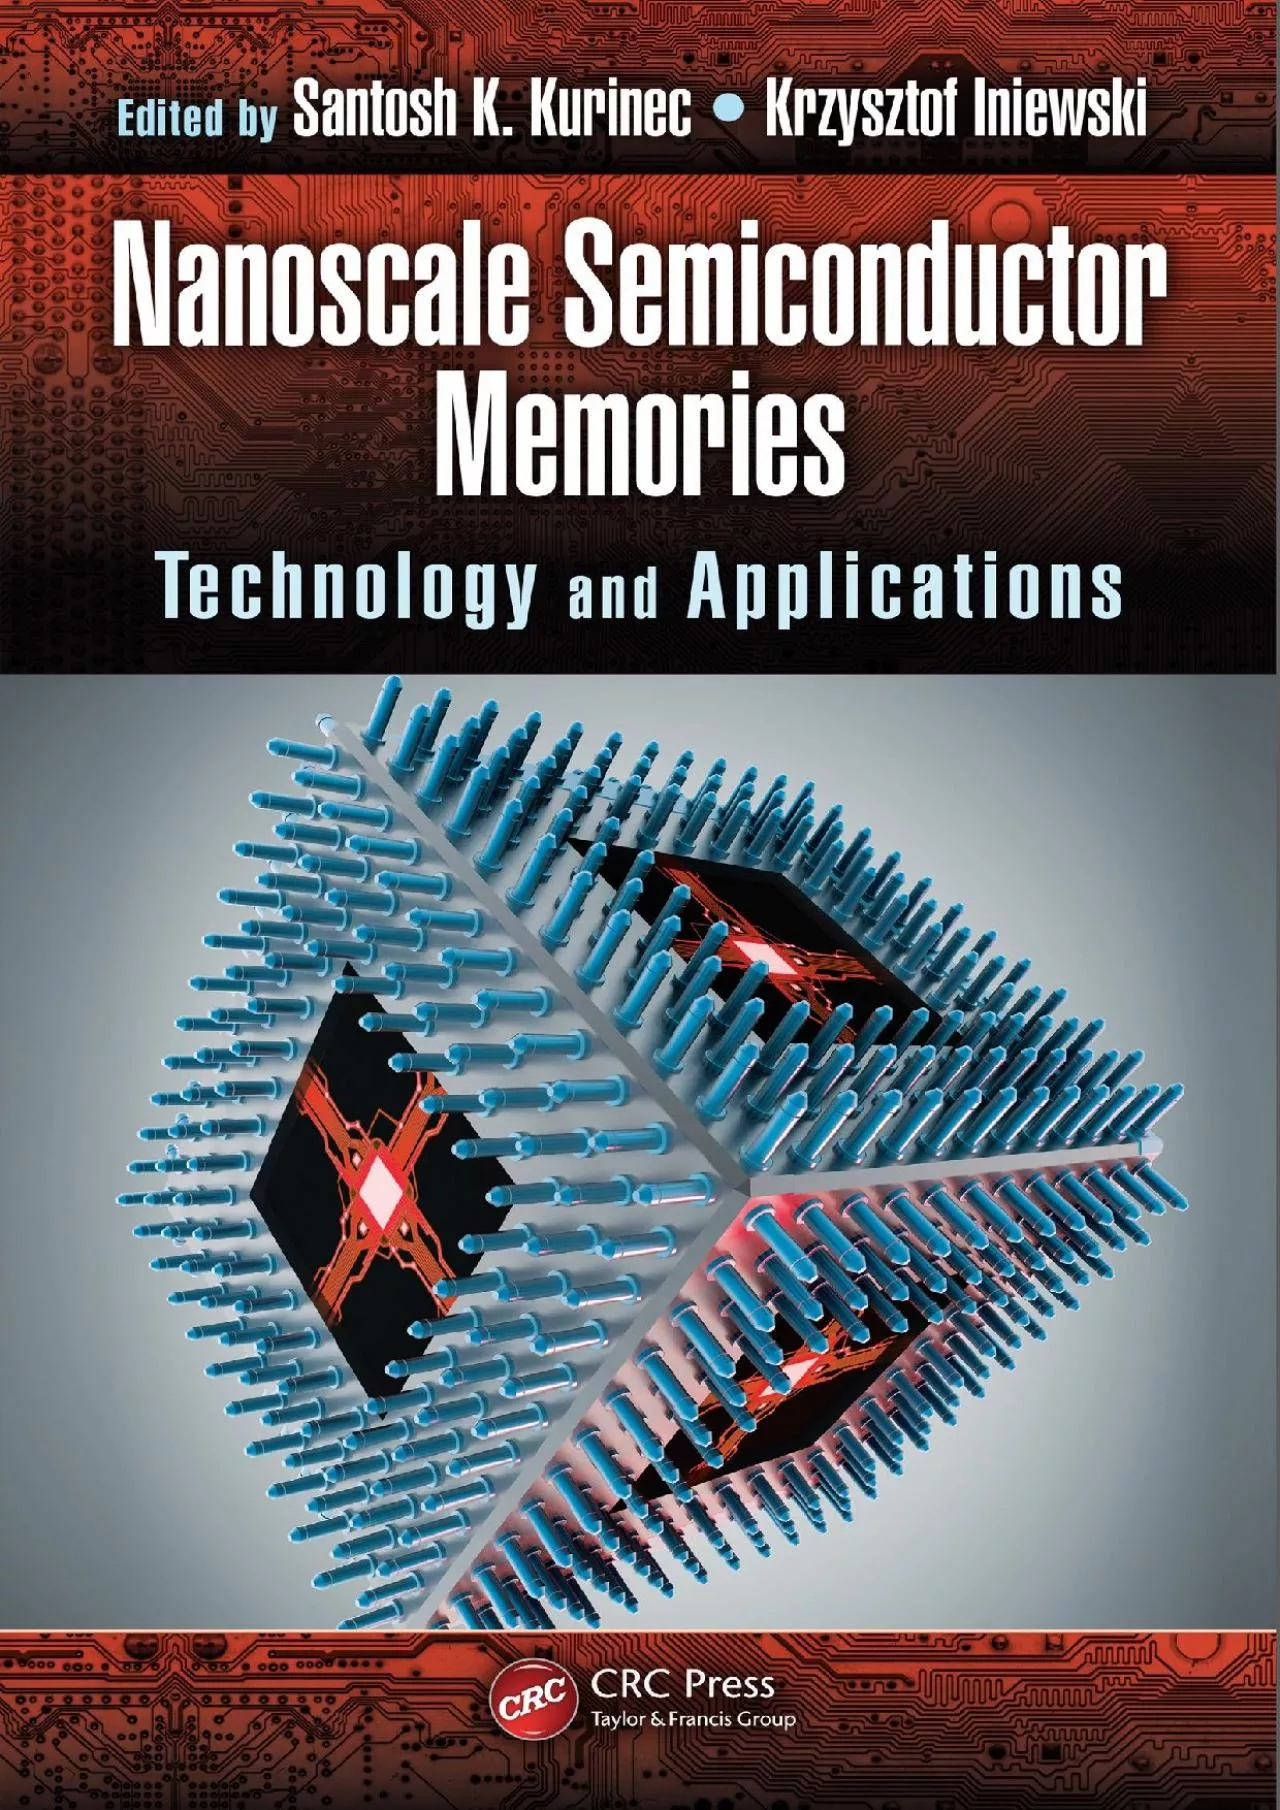 (EBOOK)-Nanoscale Semiconductor Memories: Technology and Applications (Devices, Circuits,